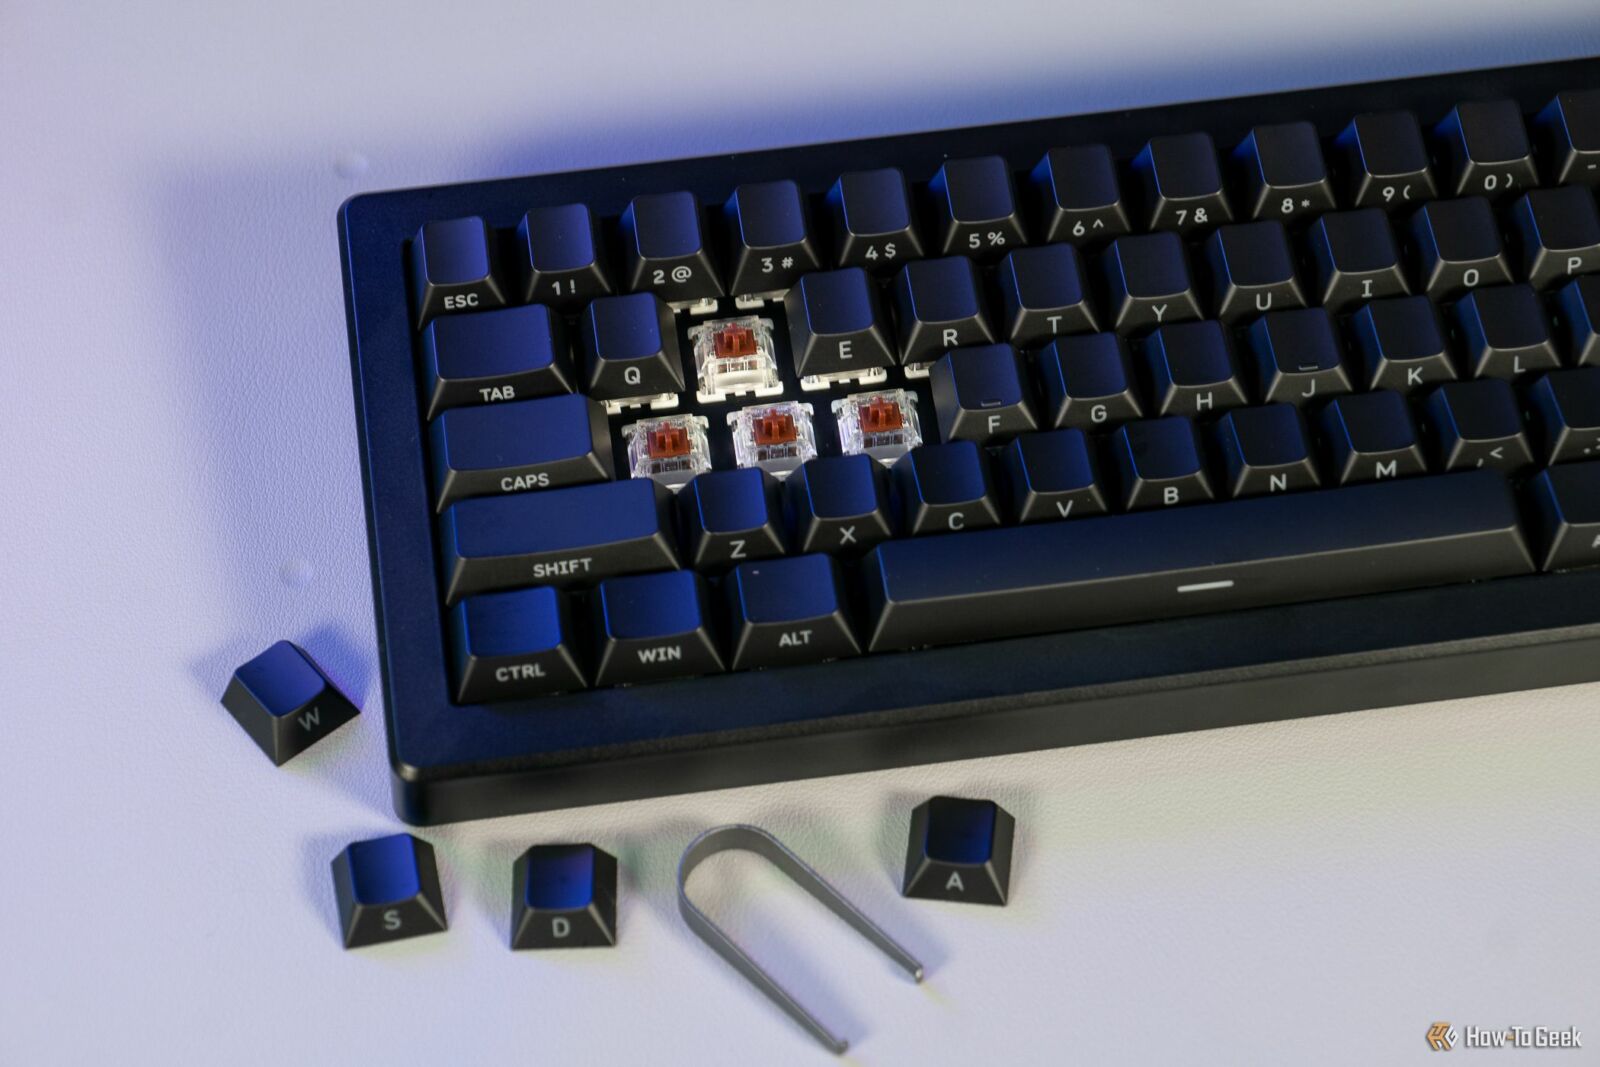 Drop CSTM65 with keycaps removed